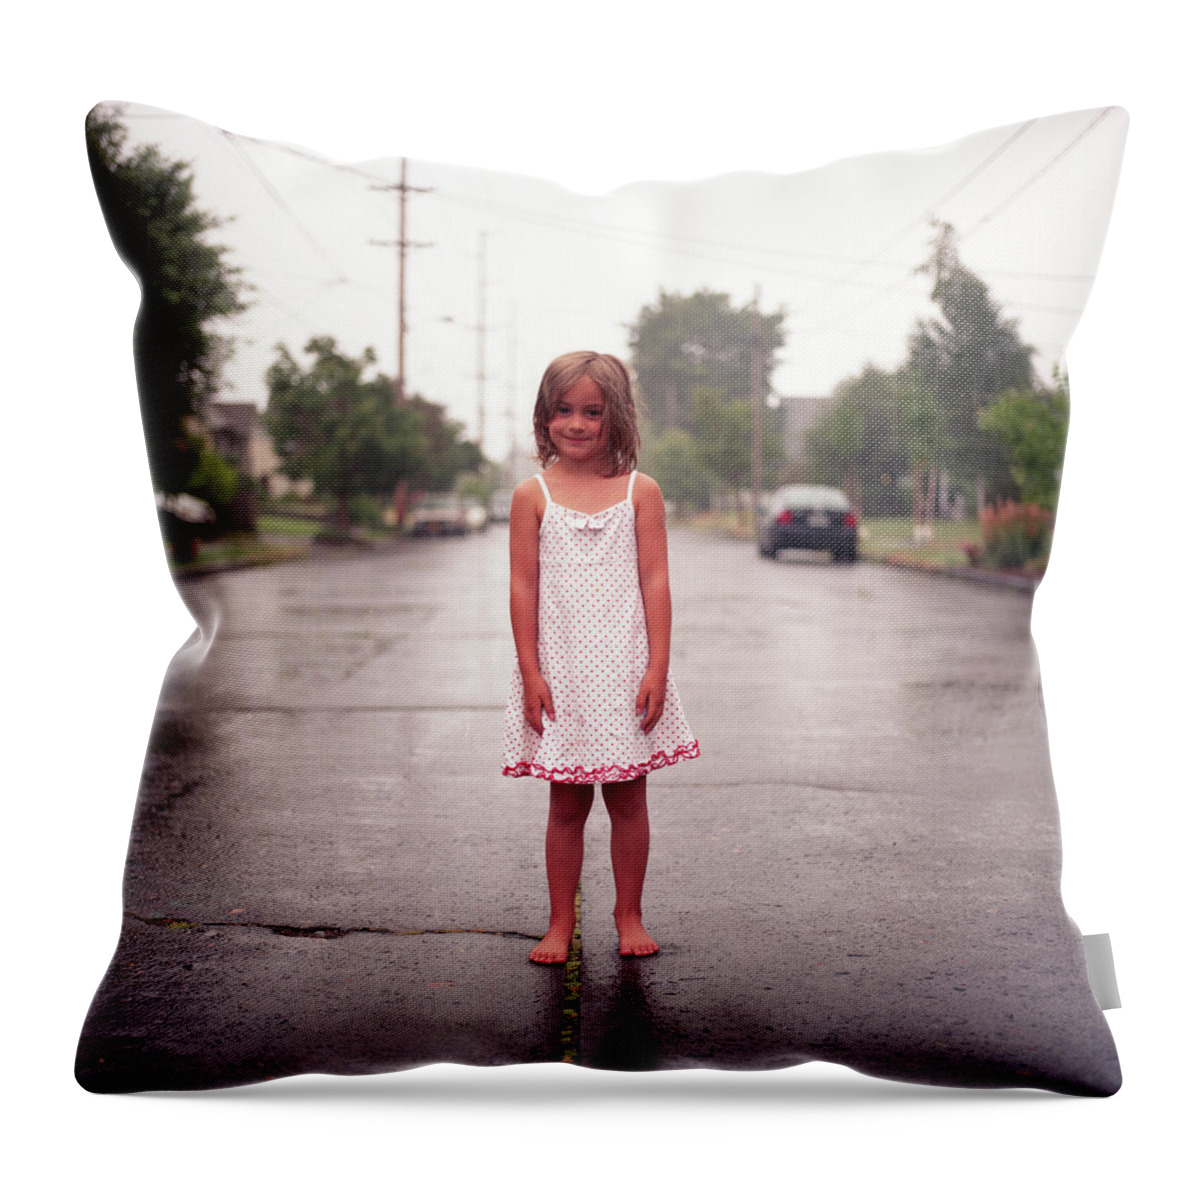 4-5 Years Throw Pillow featuring the photograph Girl In Rainy Street by By John Carleton